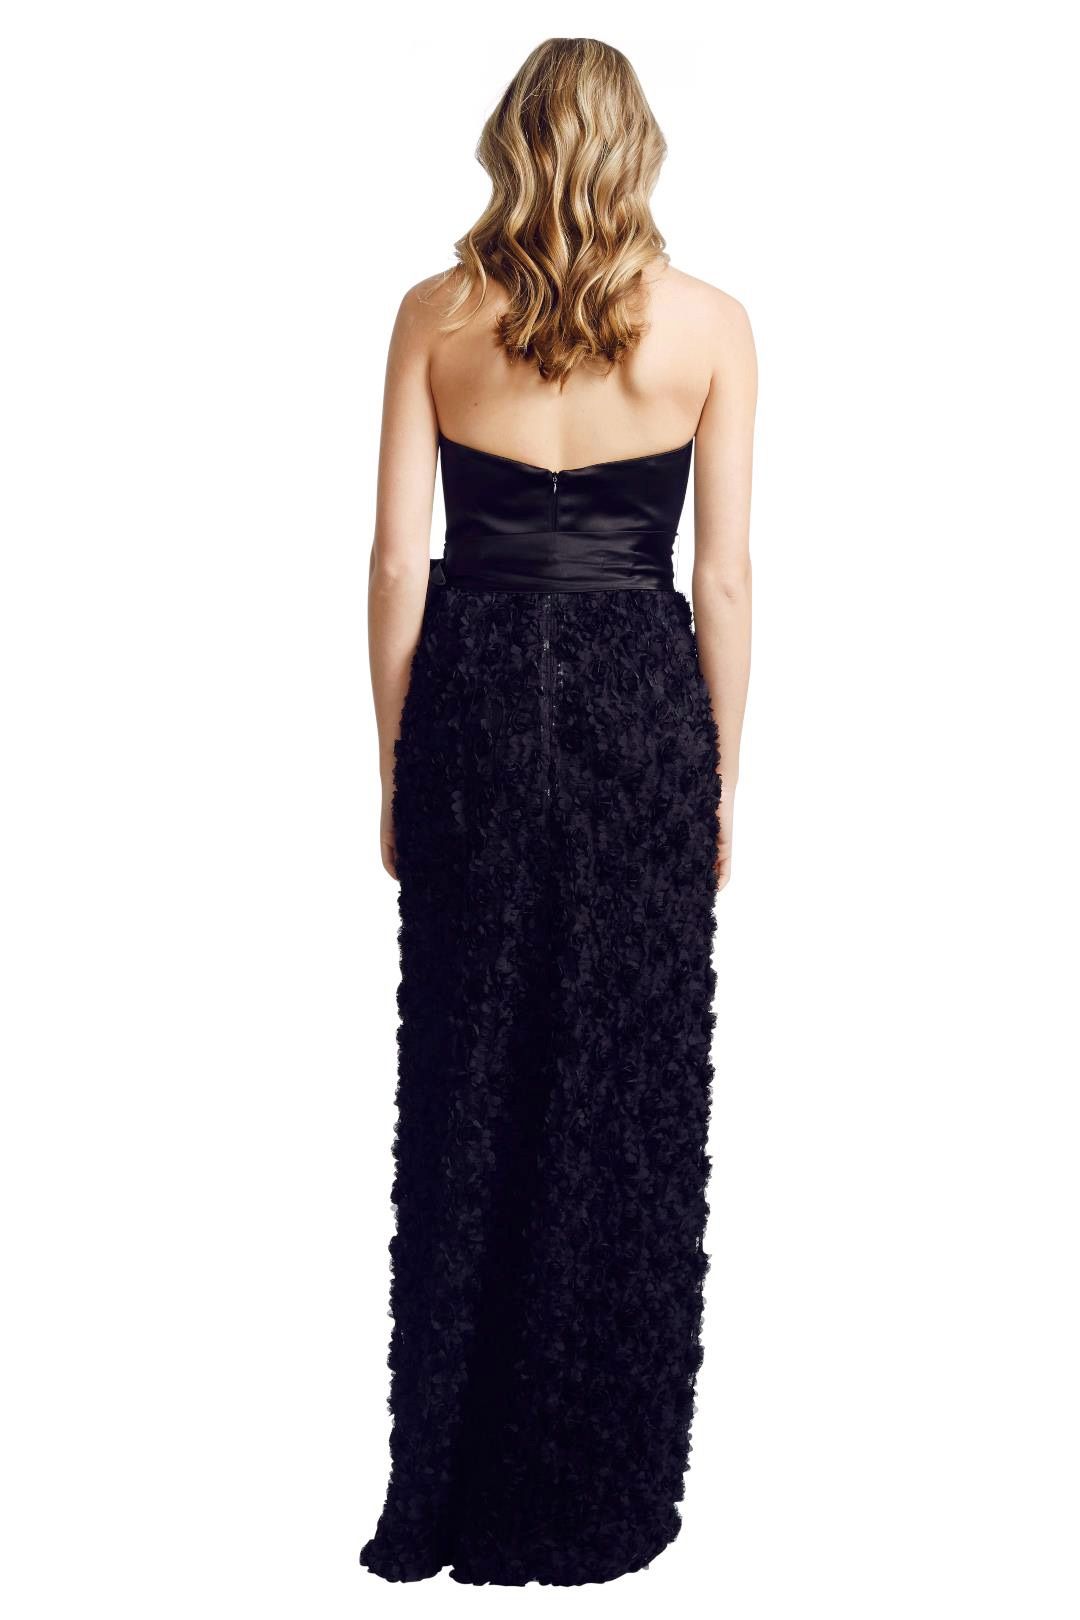 Matthew Eager - Poodle Ball Gown - Black - Back